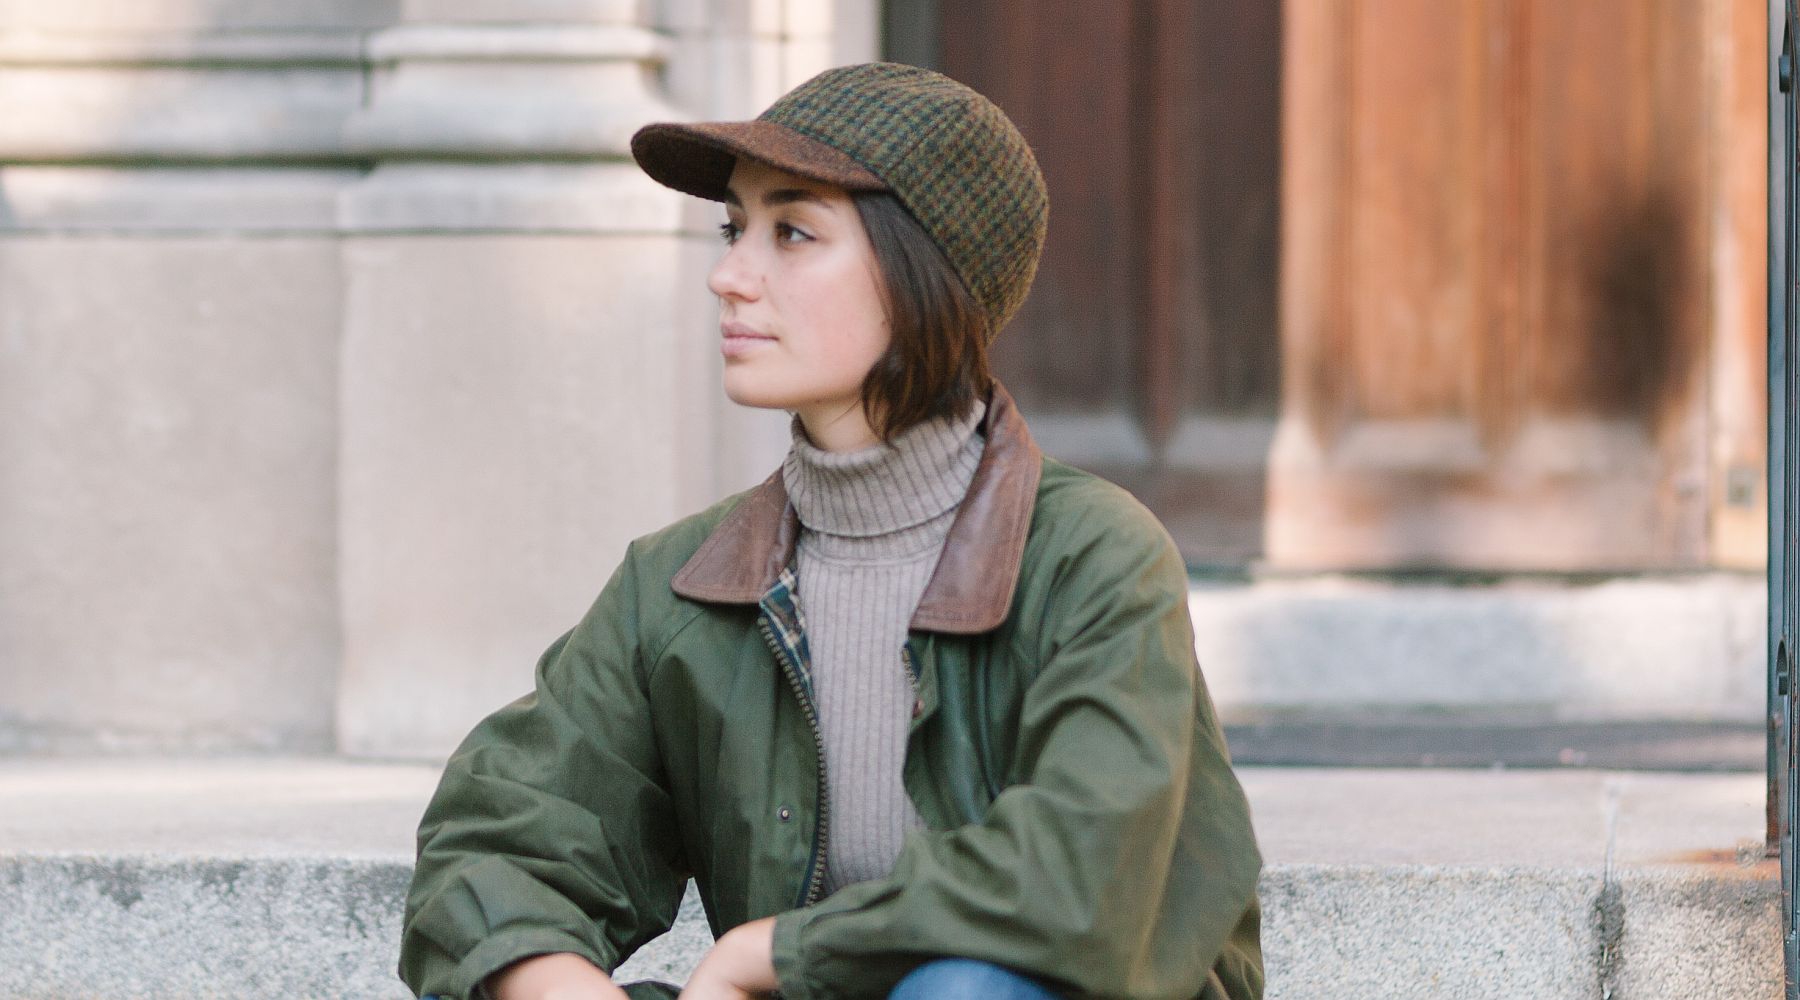 Made in Canada Hats by Puffin Gear for the first days of fall through the coldest winter days.  Linen Canvas, Oilskin Rain, Harris Tweed Caps, Boiled Wool Bucket hats, Polartec Fleece Toques, Pillbox Hats, Scarves, Blankets